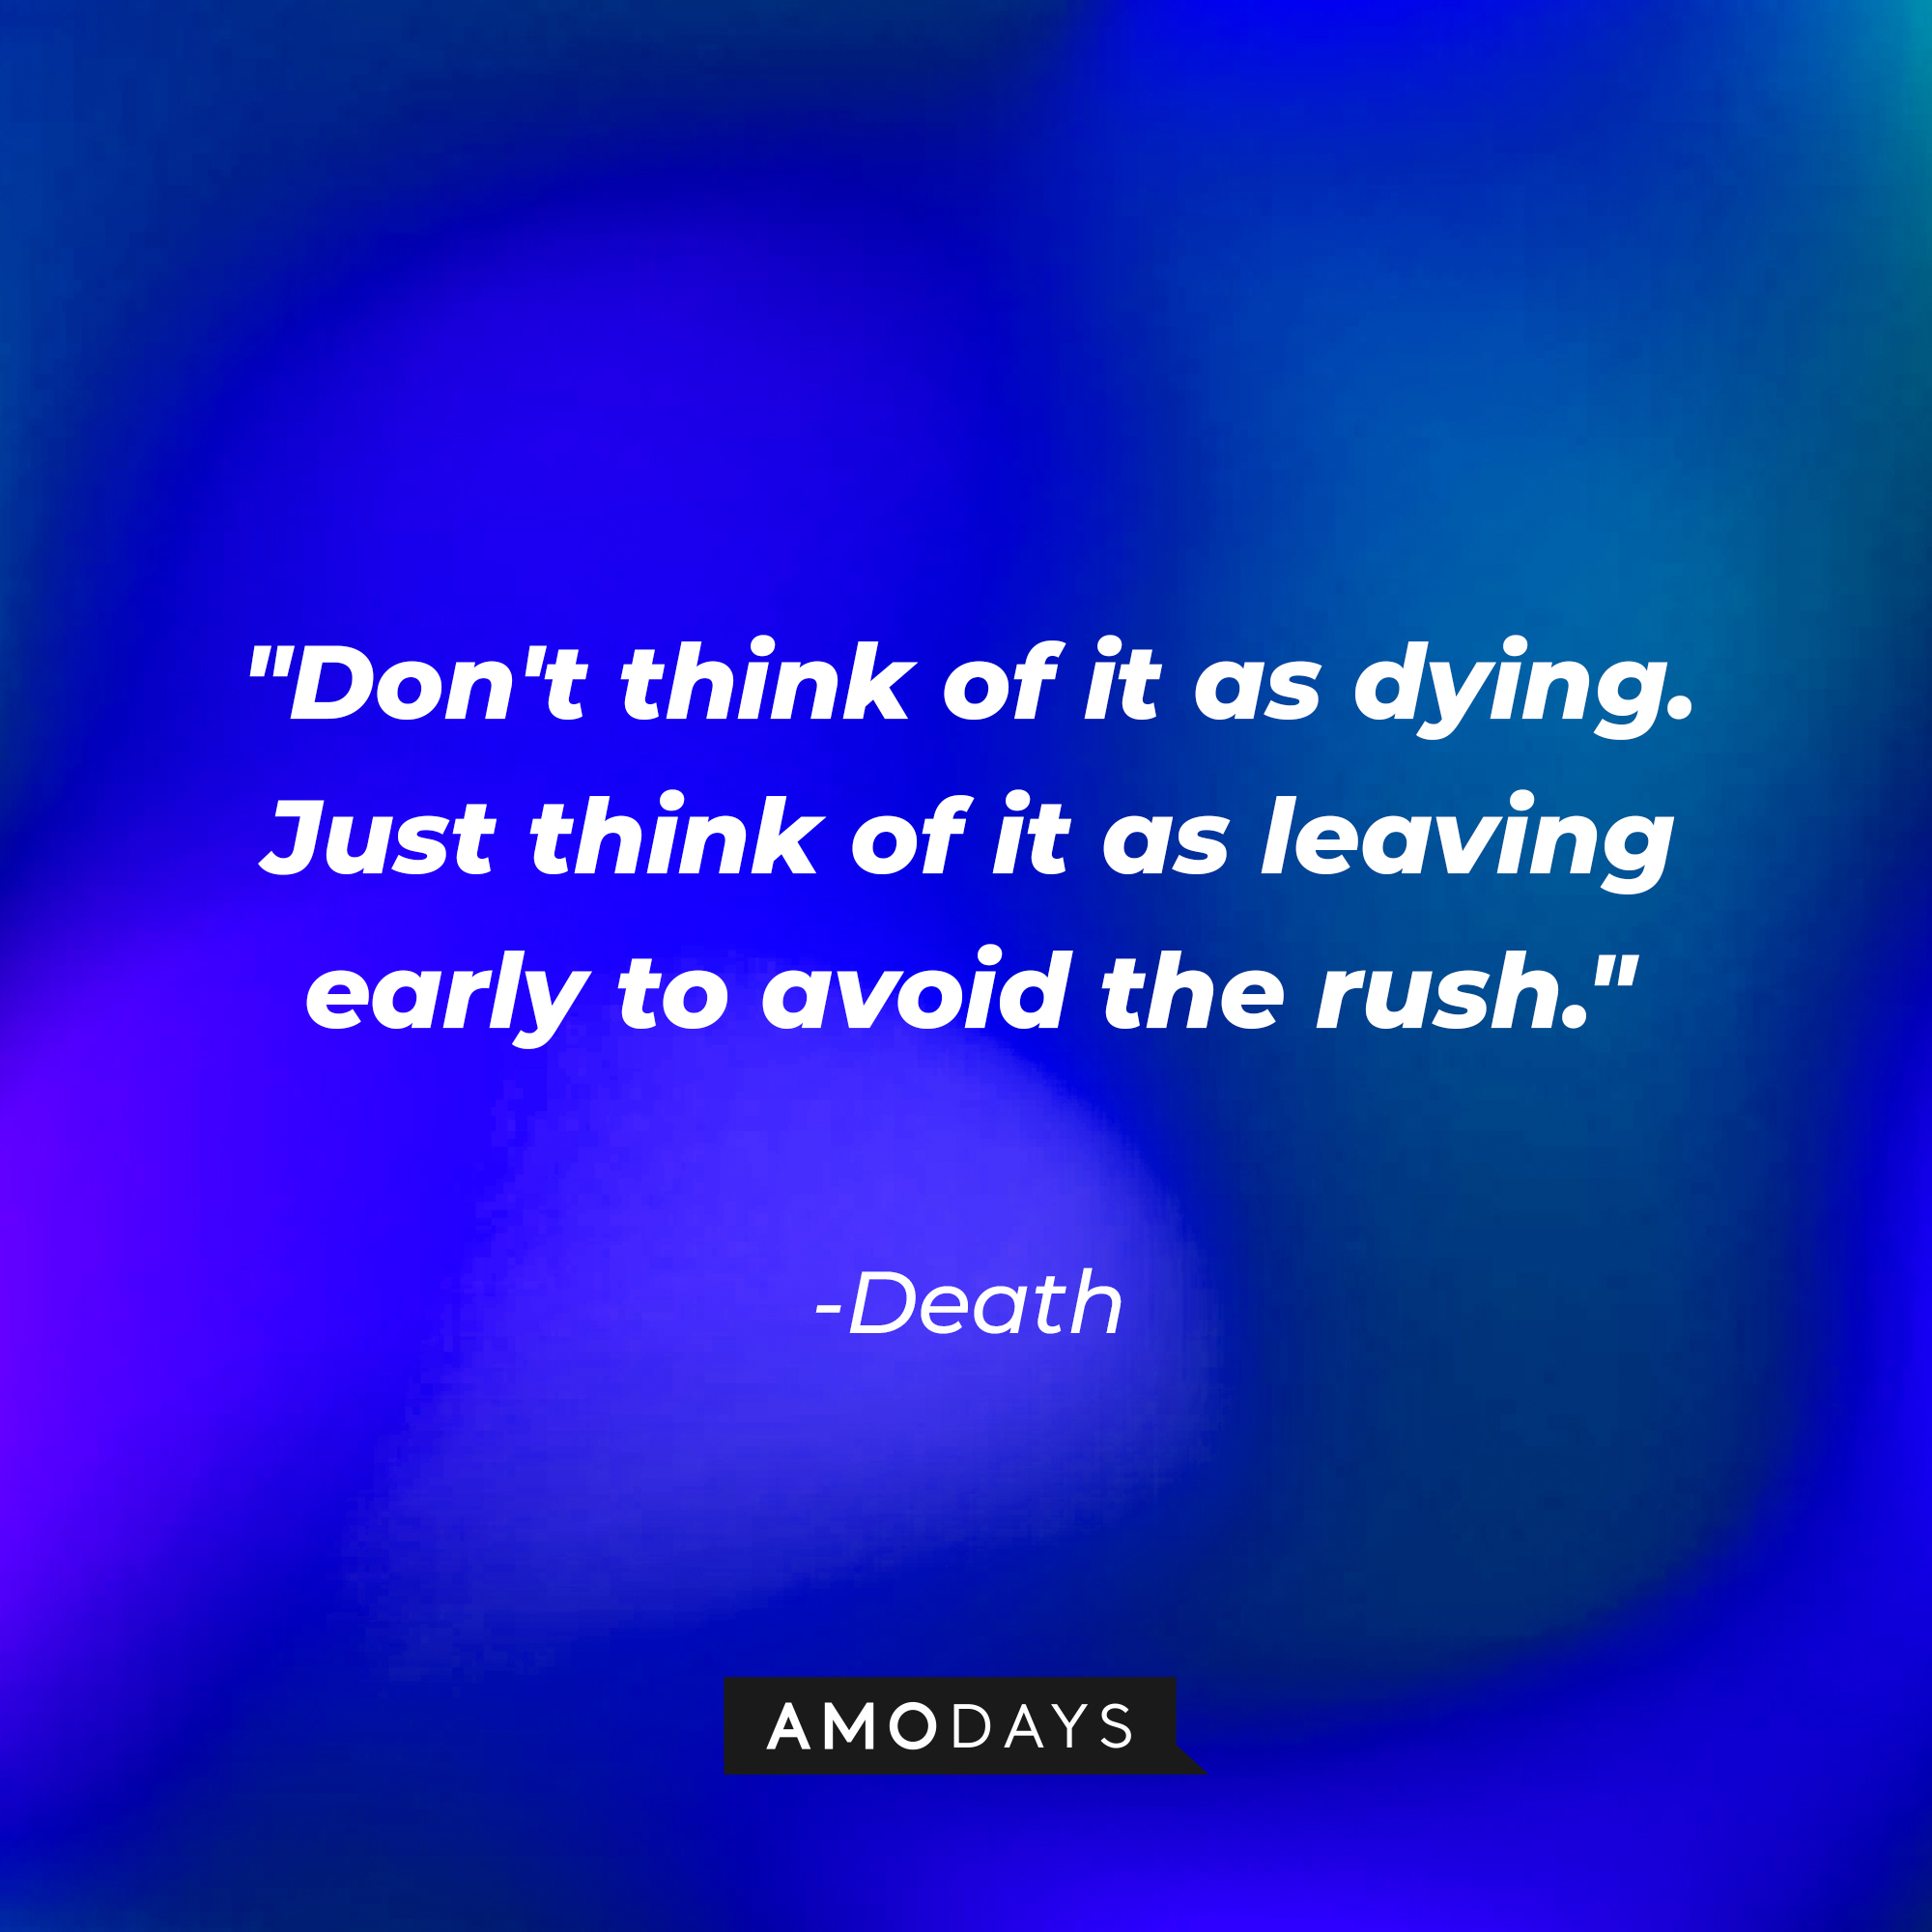 Death's quote: "Don't think of it as dying. Just think of it as leaving early to avoid the rush." | Source: AmoDays